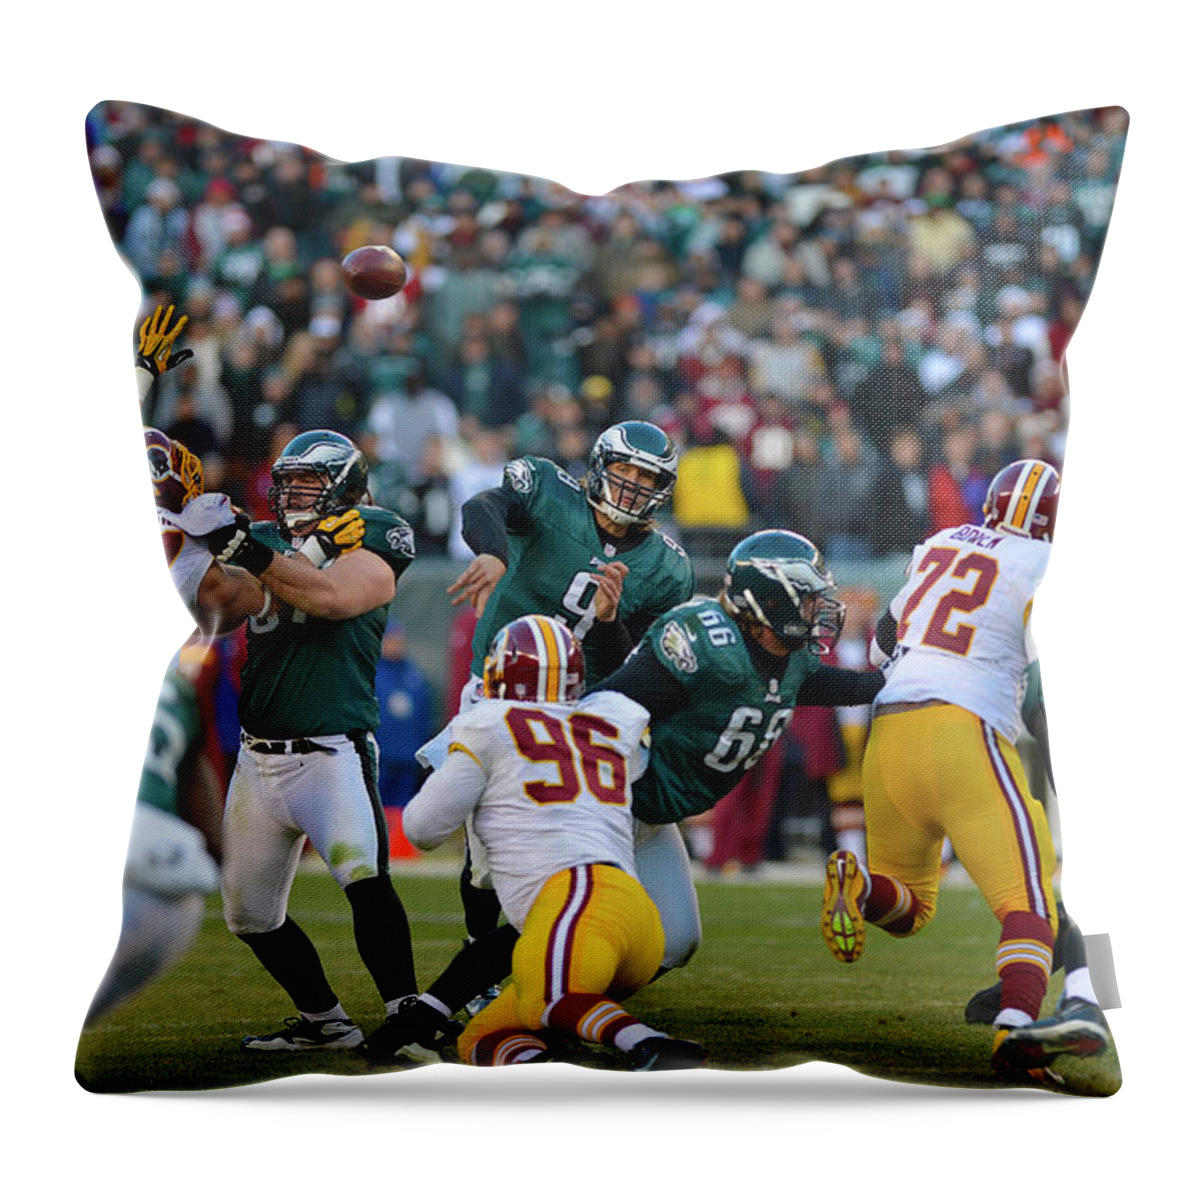 Football Throw Pillow featuring the photograph The Pass by William Jobes